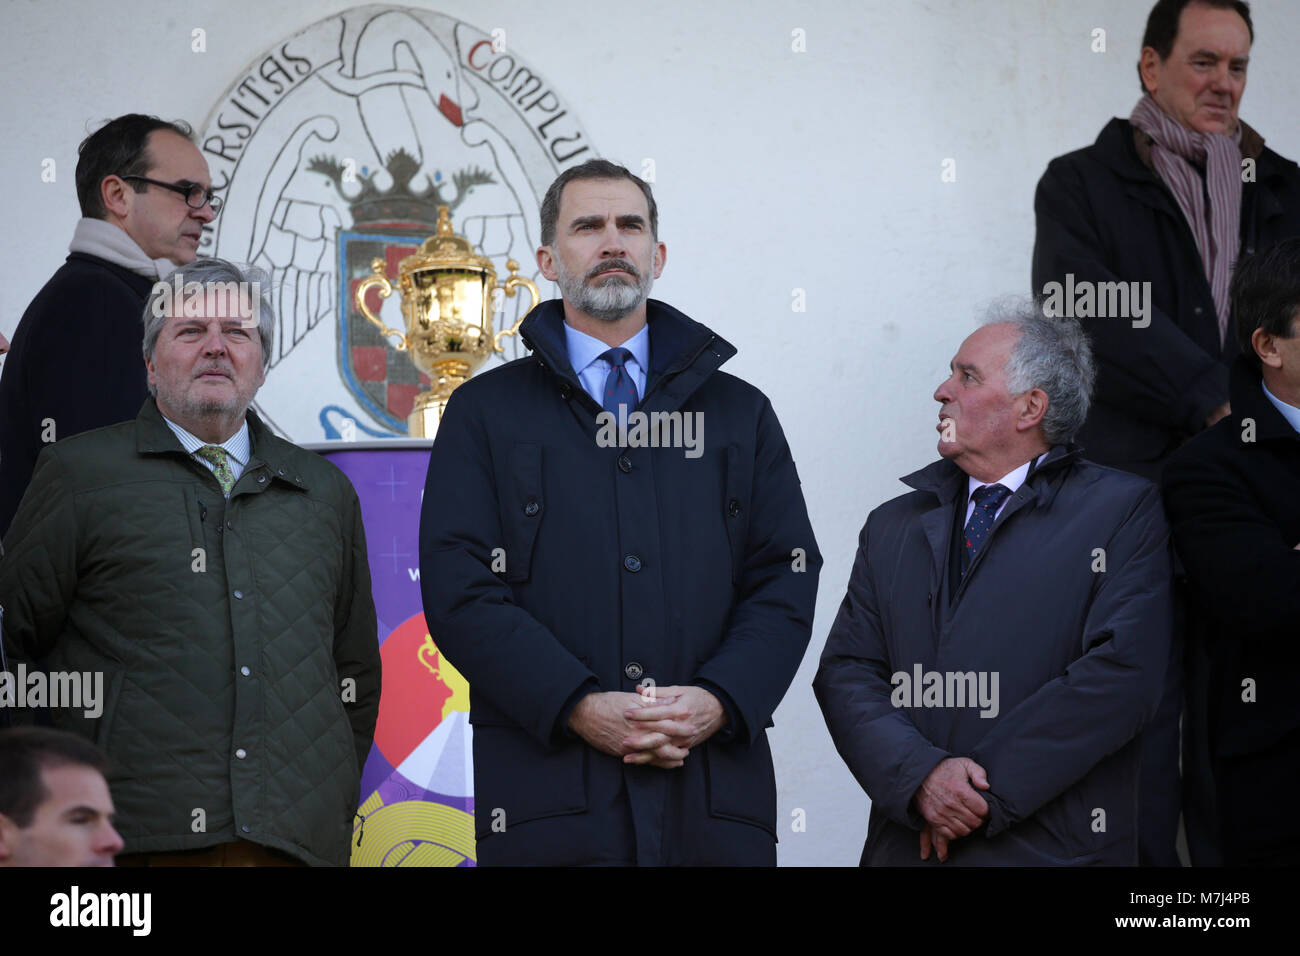 Madrid, Spain. 11th March, 2018. Spanish King Felipe VI and Inigo Mendez de Vigo during the match of rugby between Spain vs Germany in the Central of Complutense Madrid on Sunday 11 March 2018. Spain won (84-10) Germany. Credit: Gtres Información más Comuniación on line, S.L./Alamy Live News Stock Photo